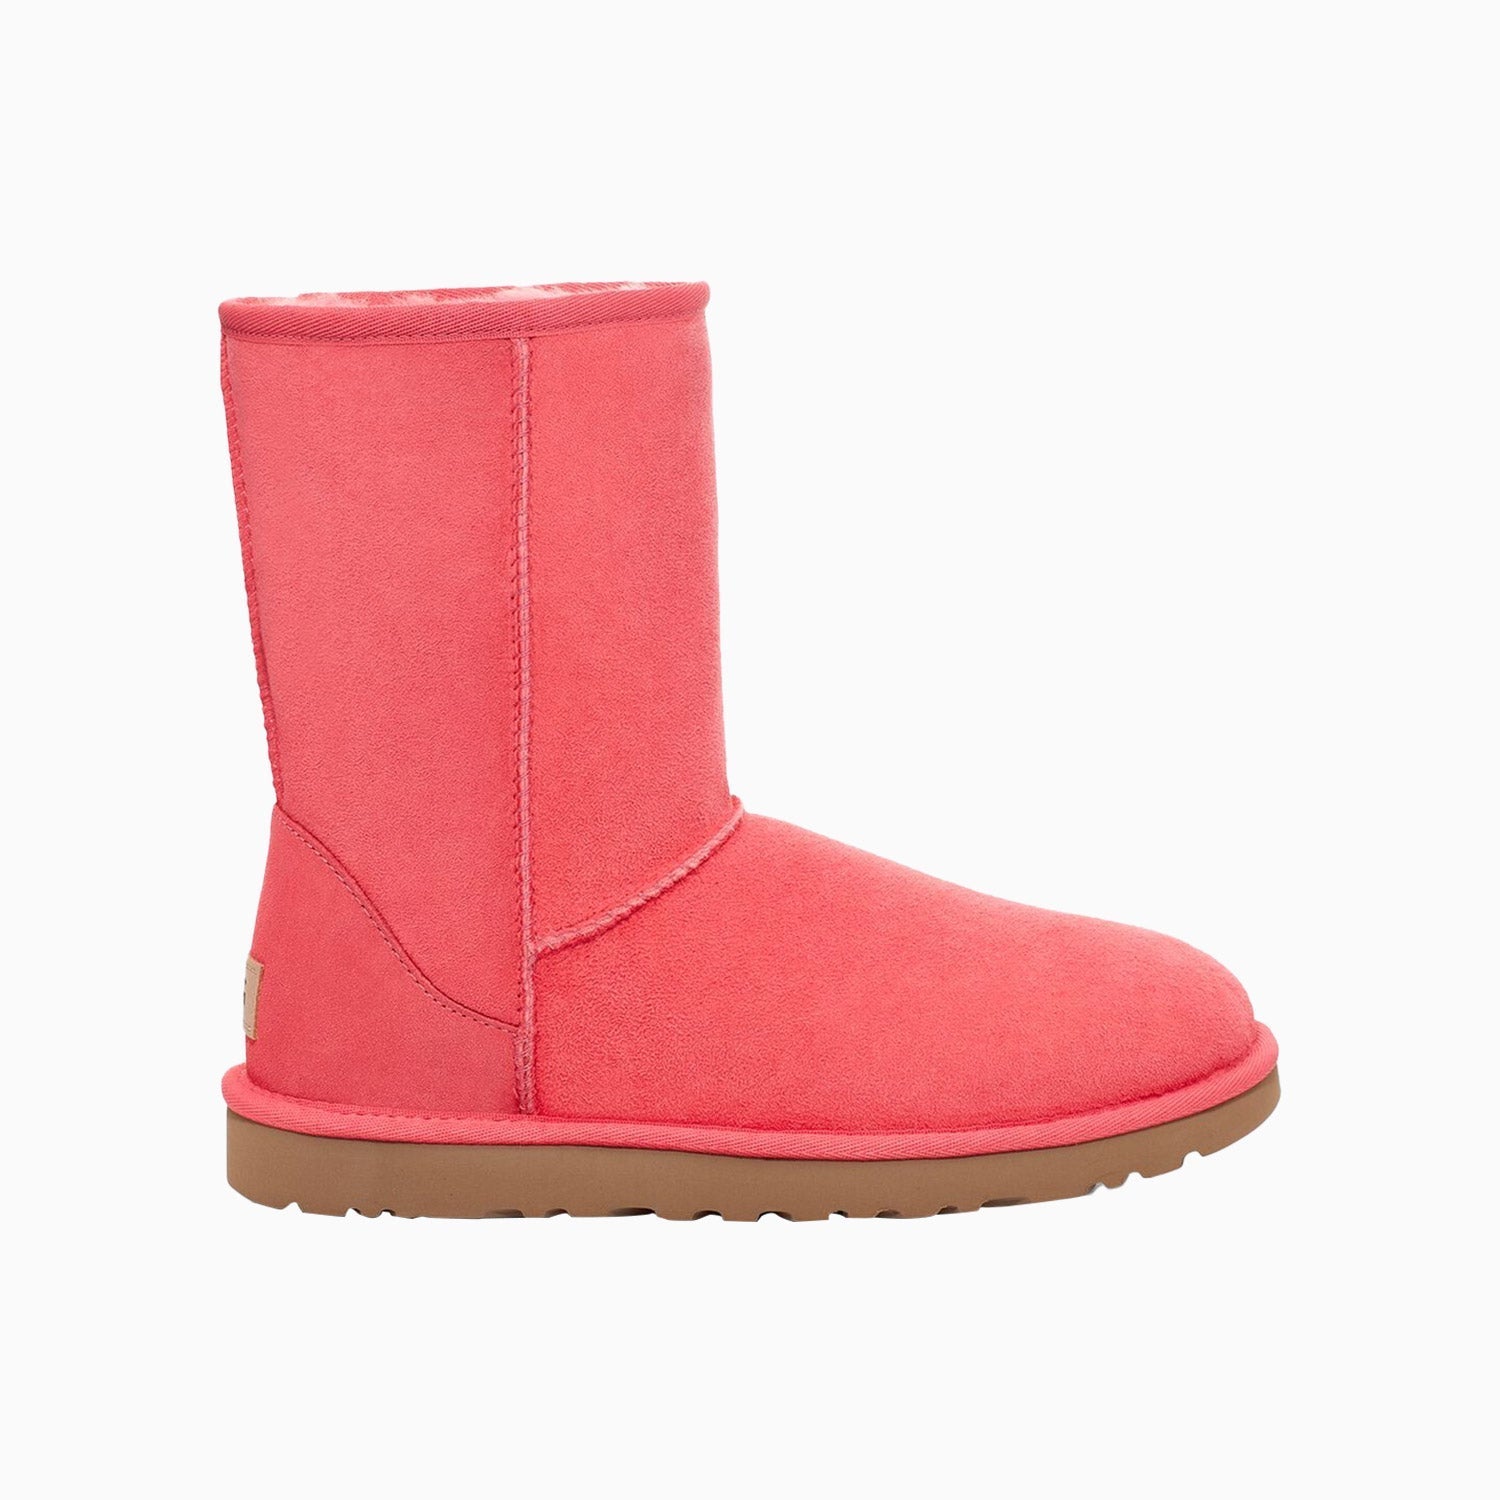 UGG Women's Classic II Boot - Color: Nantucket Coral - Tops and Bottoms USA -